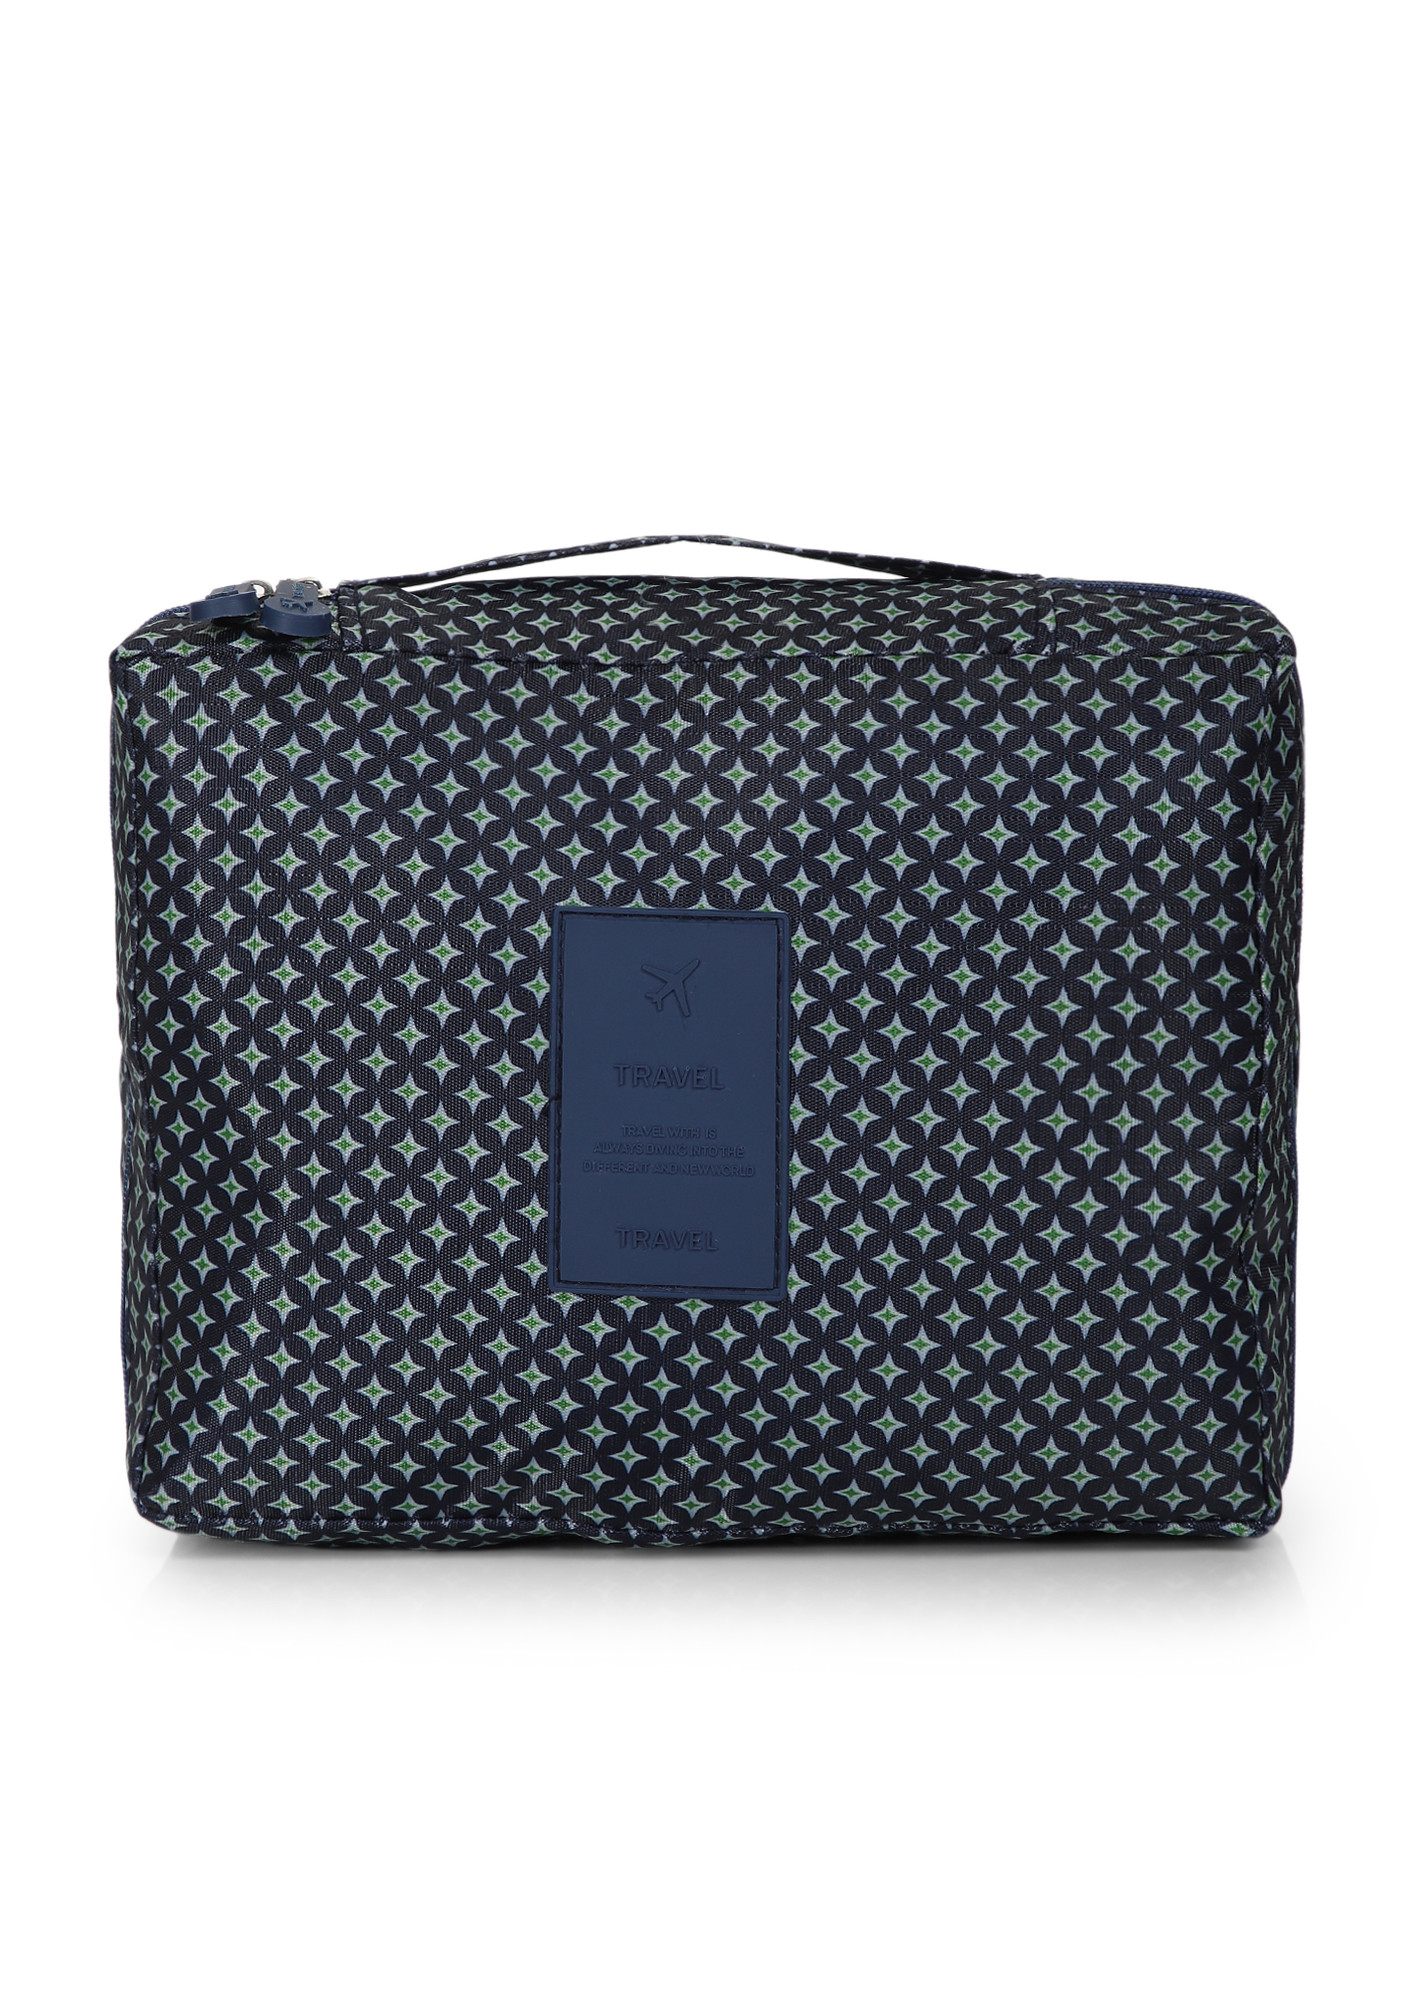 HOLD-ON BABE NAVY MAKE-UP POUCH 